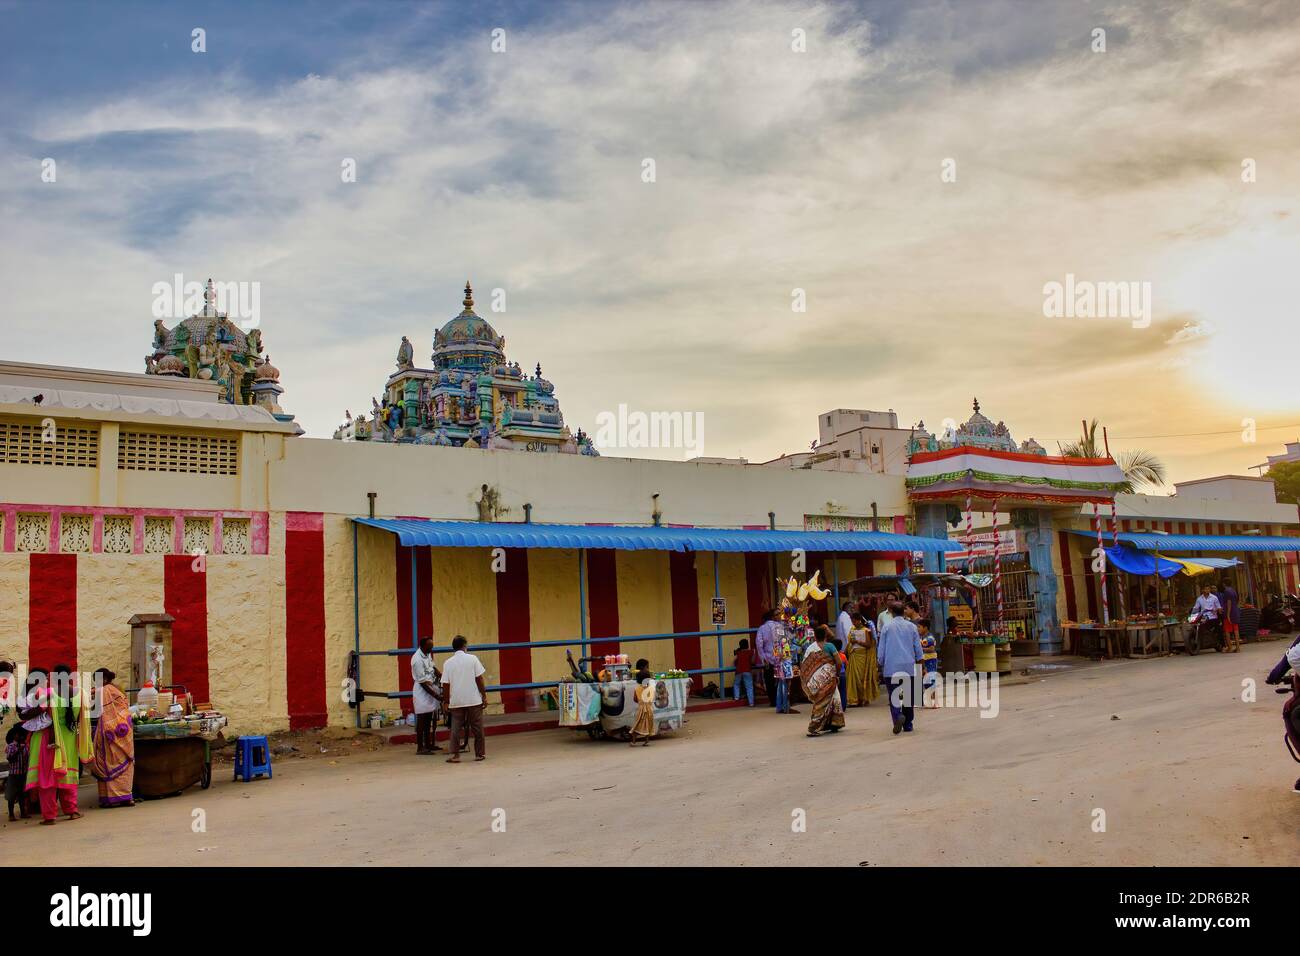 Chennai, South India - October 27, 2018: Interior of Ashtalakshmi Temple against dramatic sunset. Indian devotee worship or doing prayer inside a hind Stock Photo